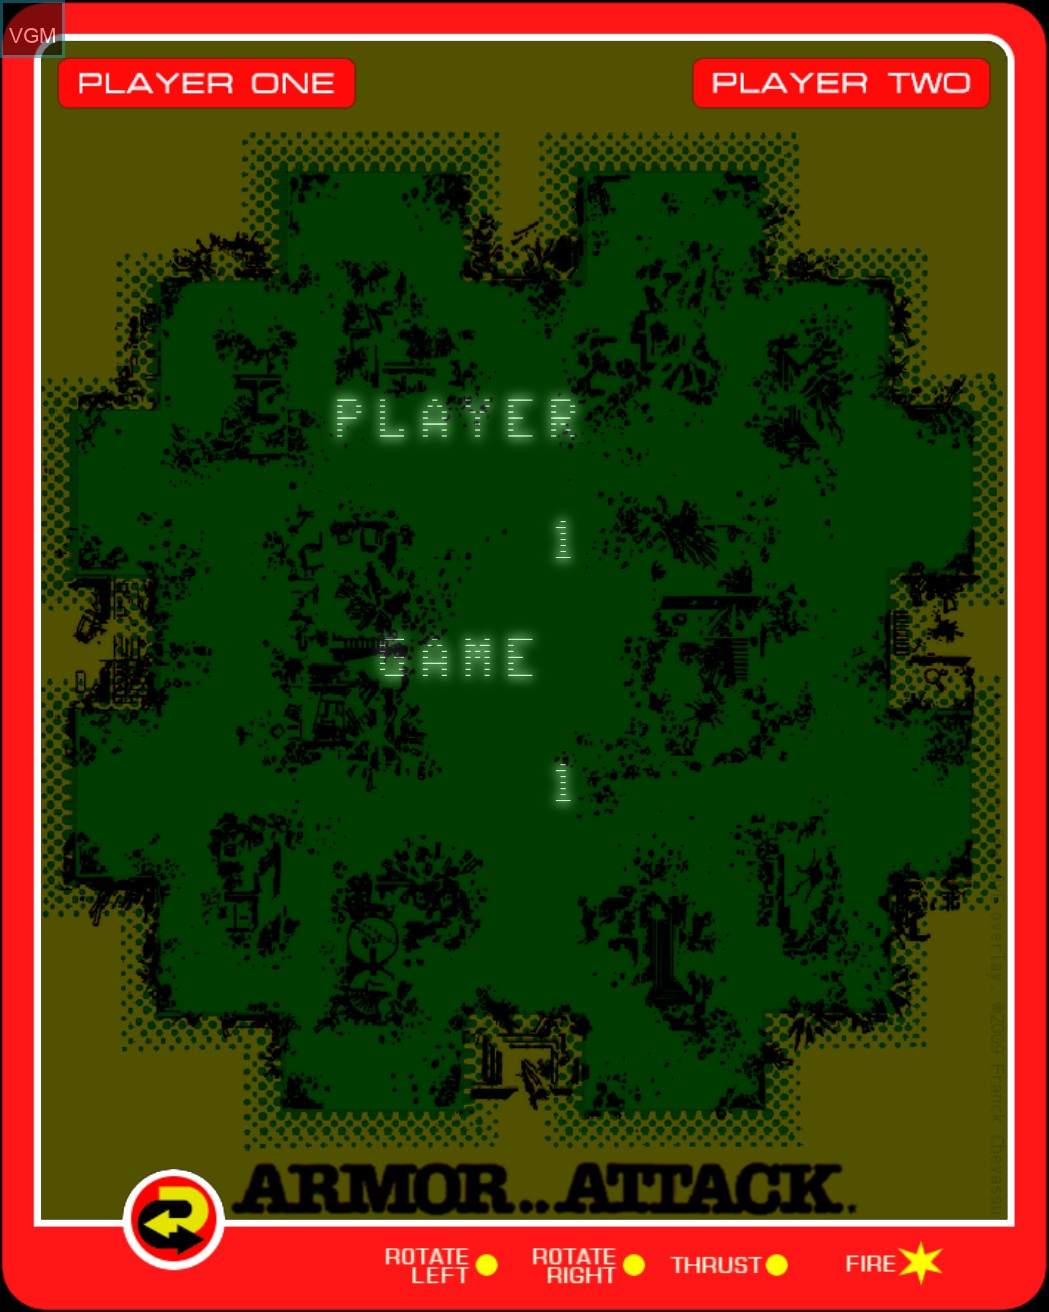 Menu screen of the game Armor..Attack on MB Vectrex